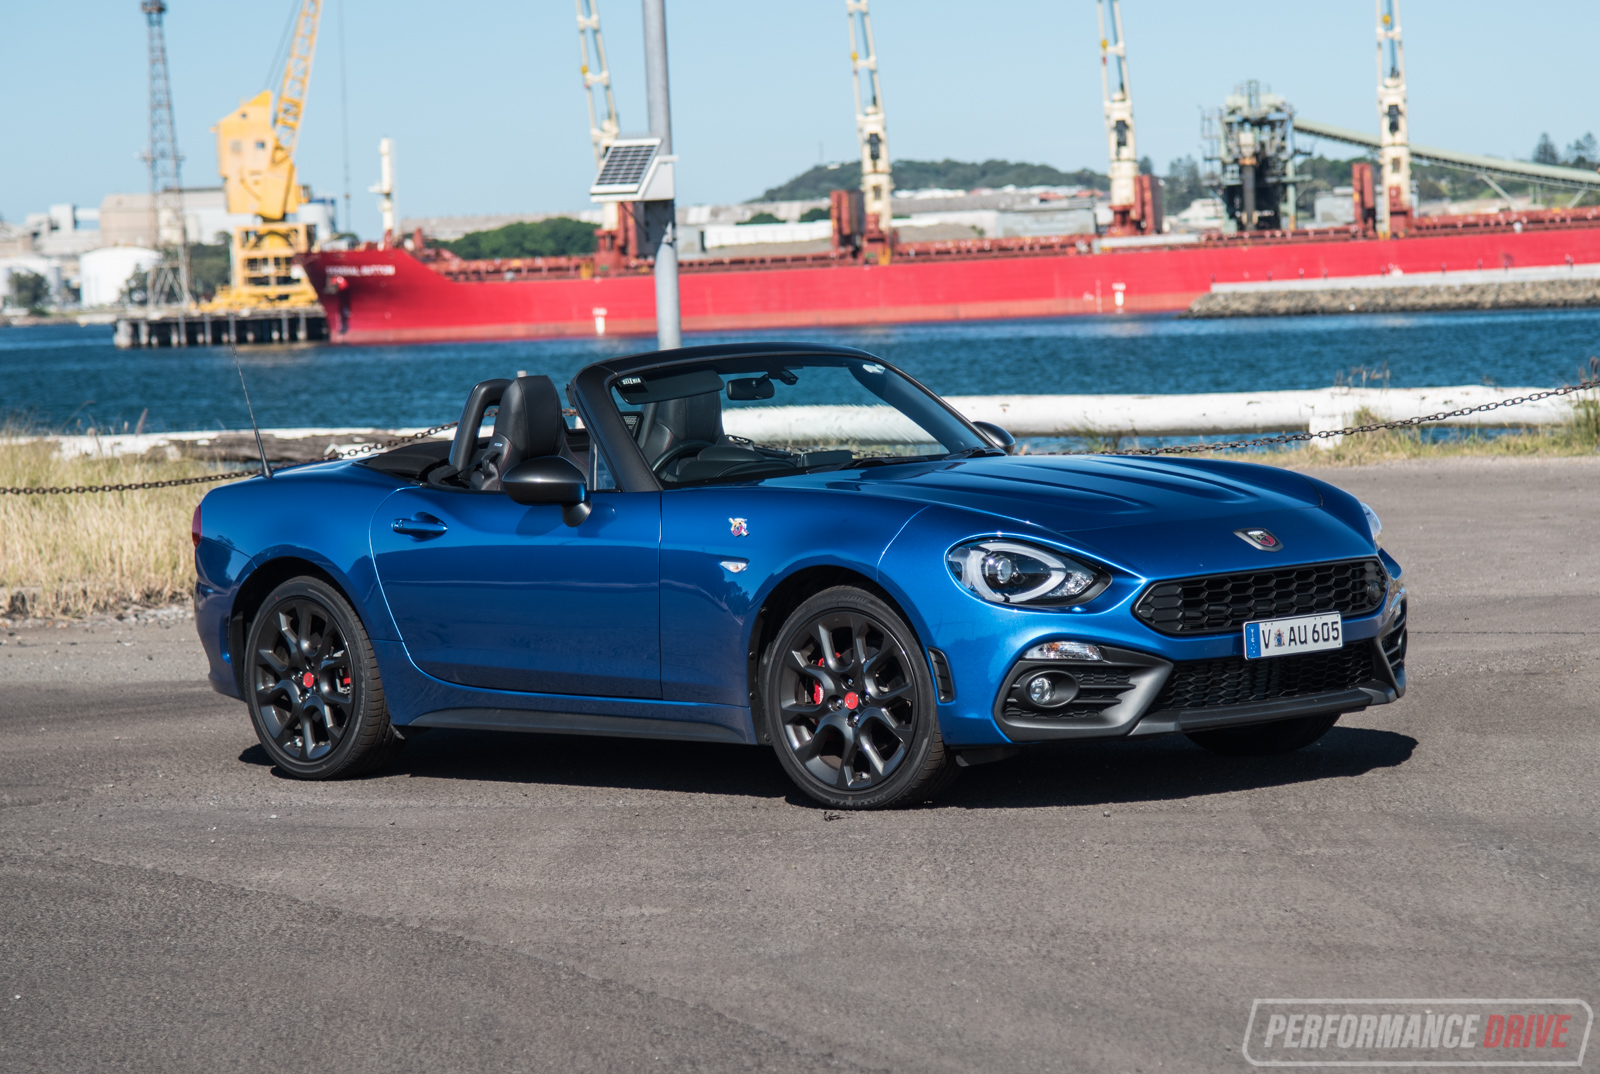 2017 Abarth 124 Spider review (video)